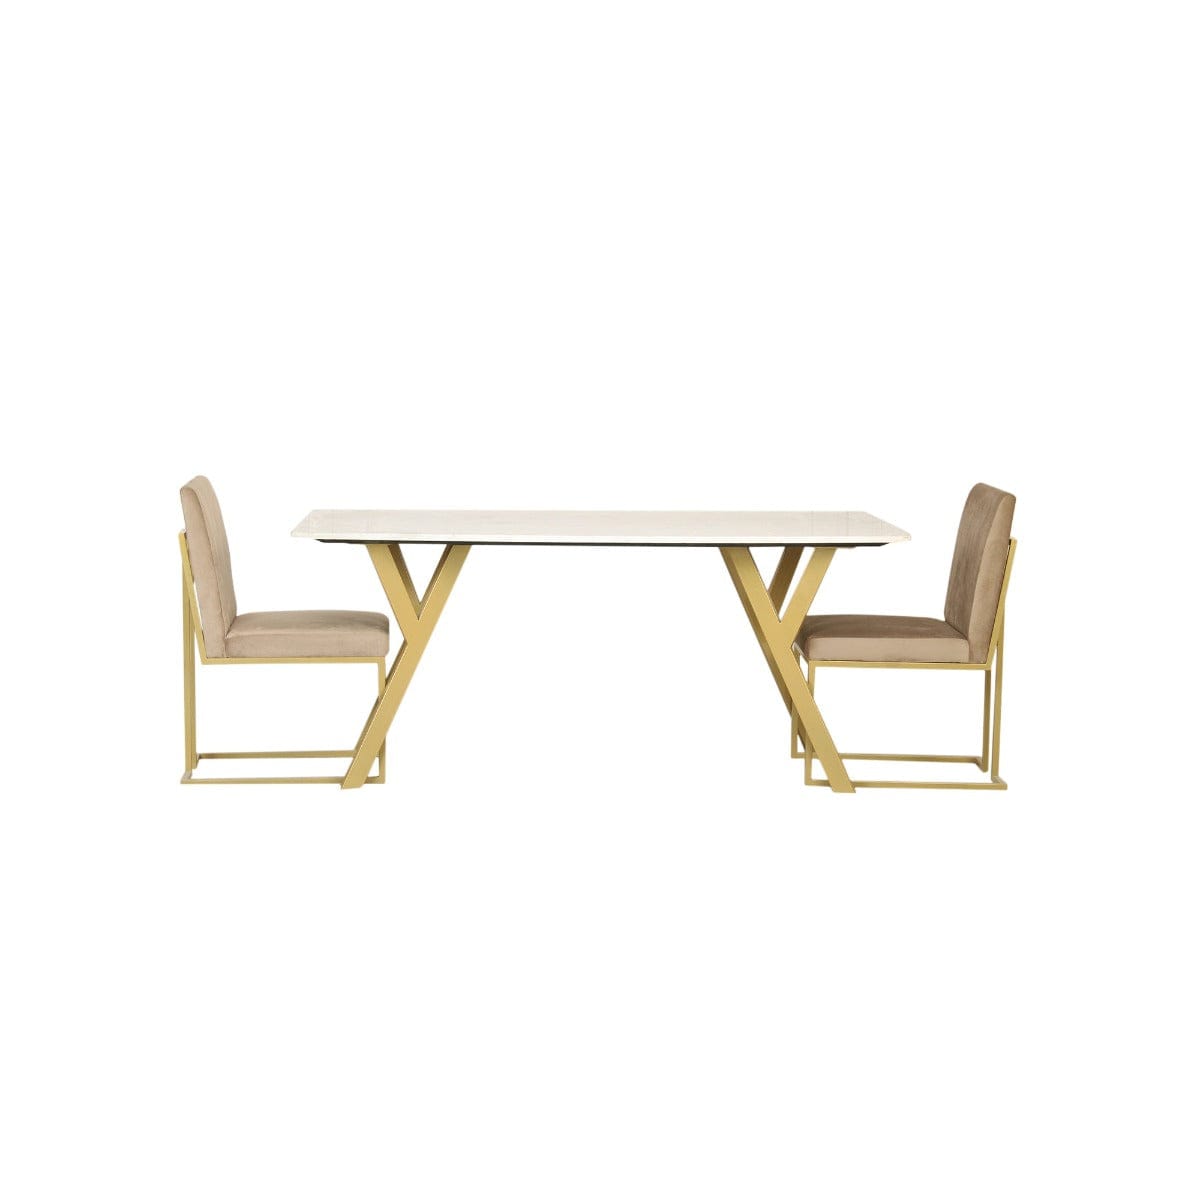 Kir 6 Seater Marble Dining Table Set In Gold Finish